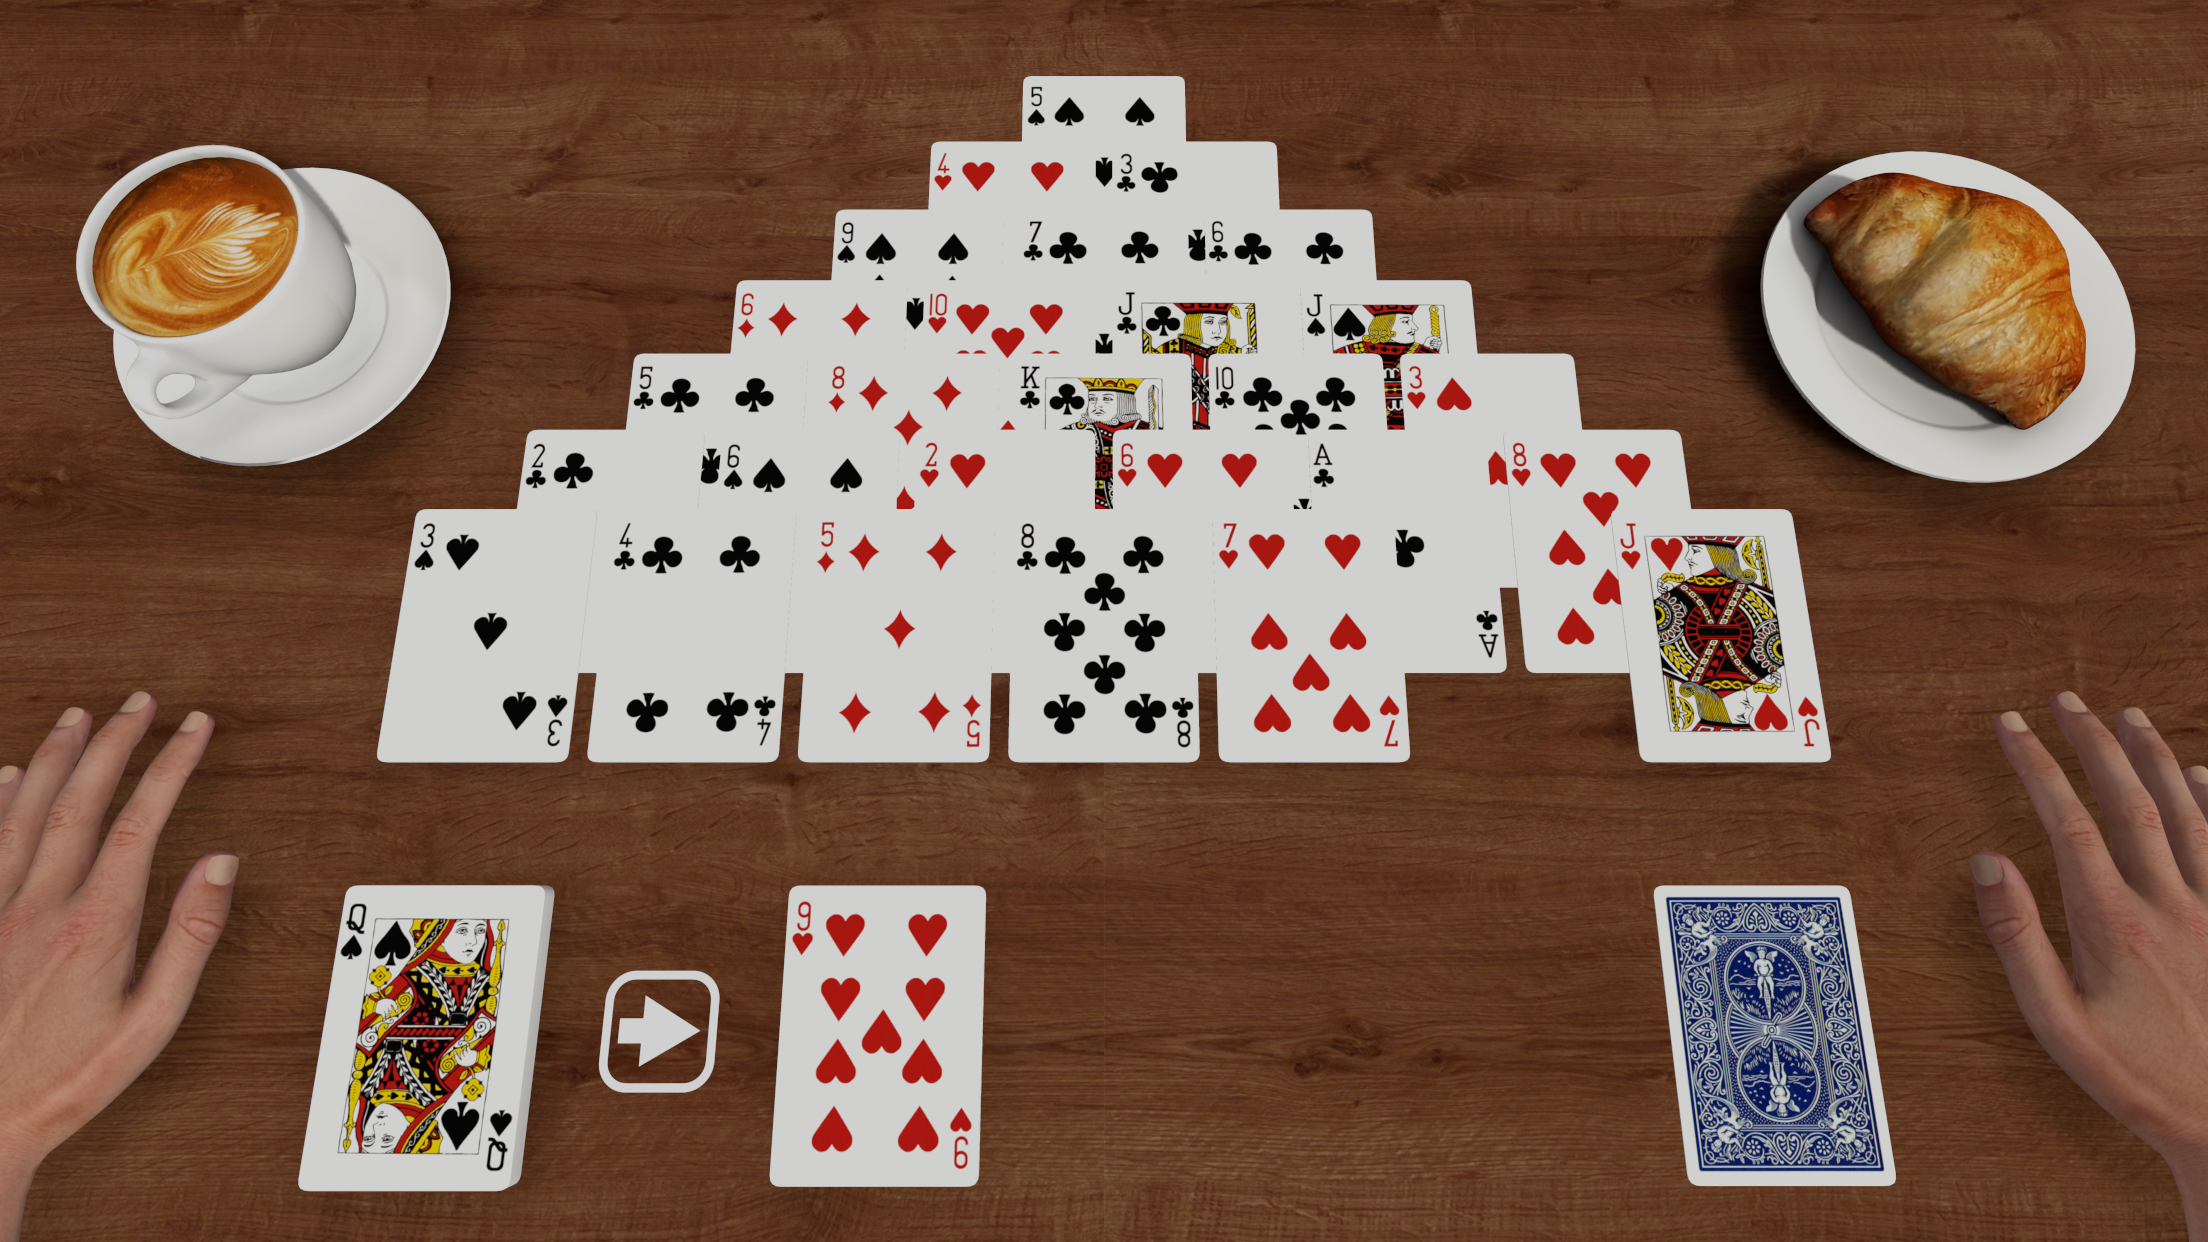 Pyramid Solitaire::Appstore for Android